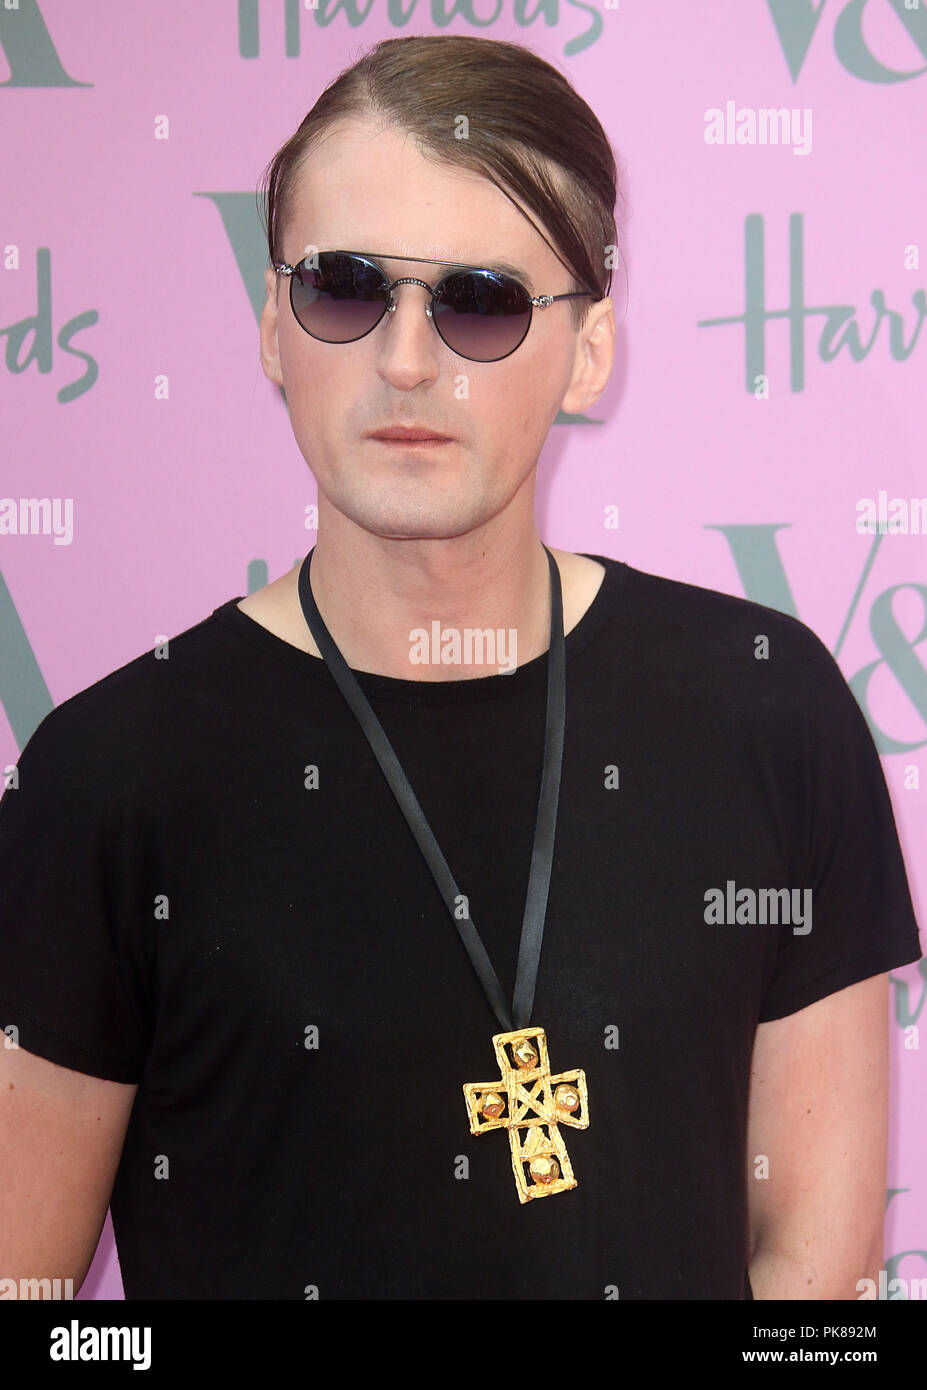 Jun 20, 2018  - Gareth Pugh attending V&A Summer Party 2018, Victoria and Albert Museum in London, England, UK Stock Photo